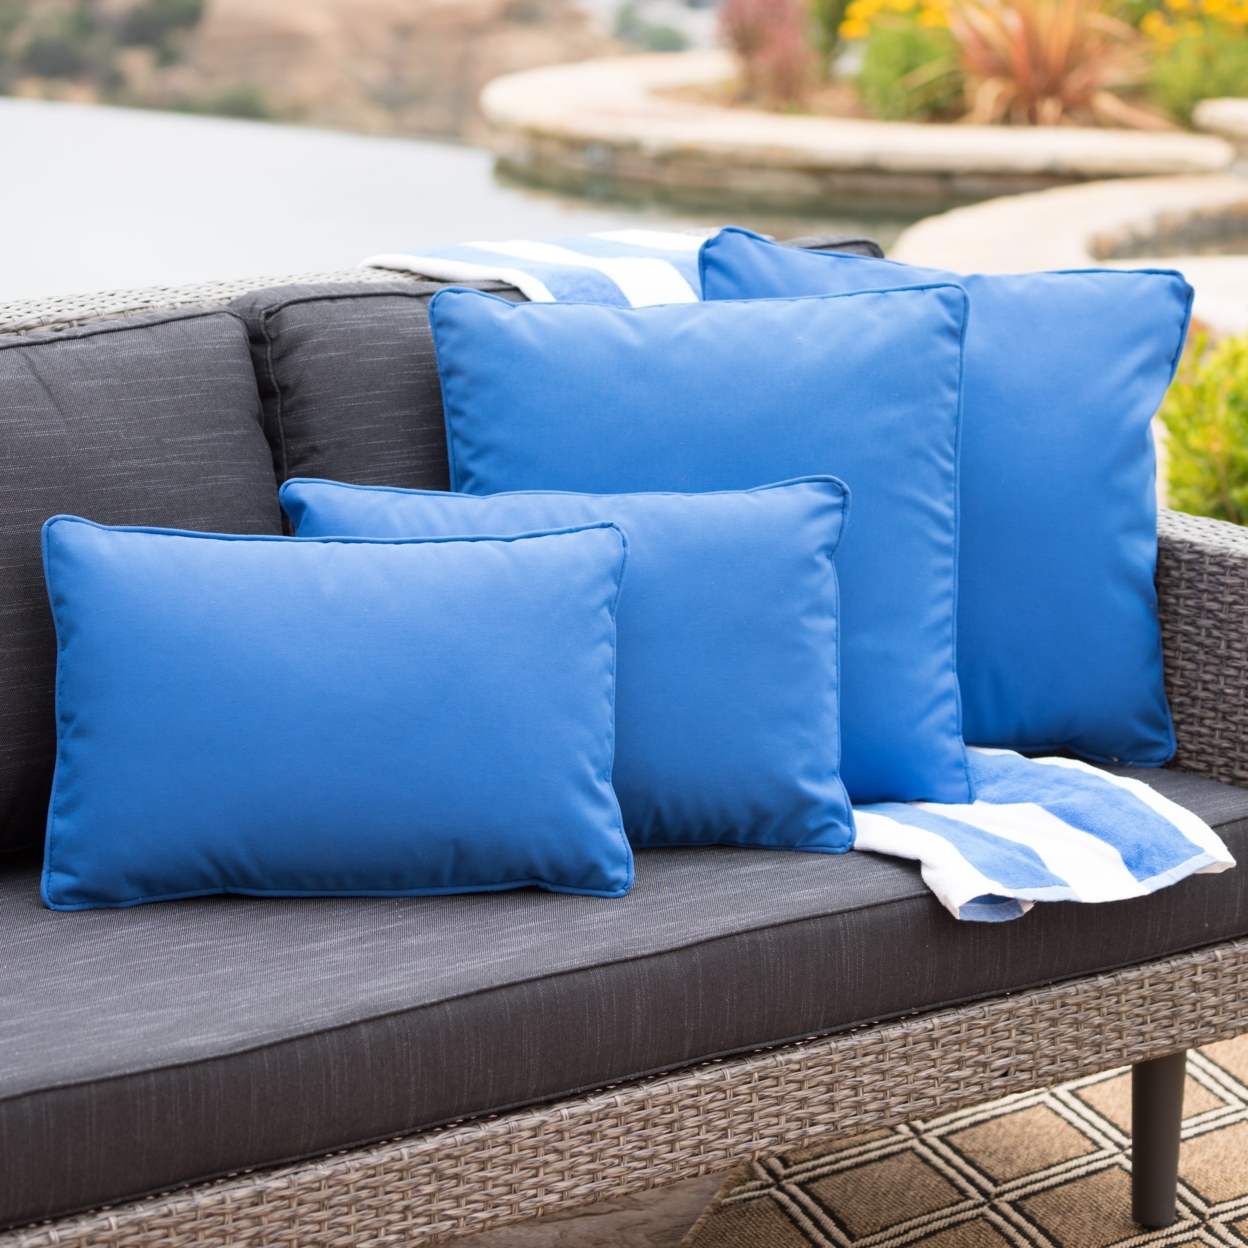 Corona Outdoor Patio Water Resistant Pillow Sets - Teal, Set Of 4